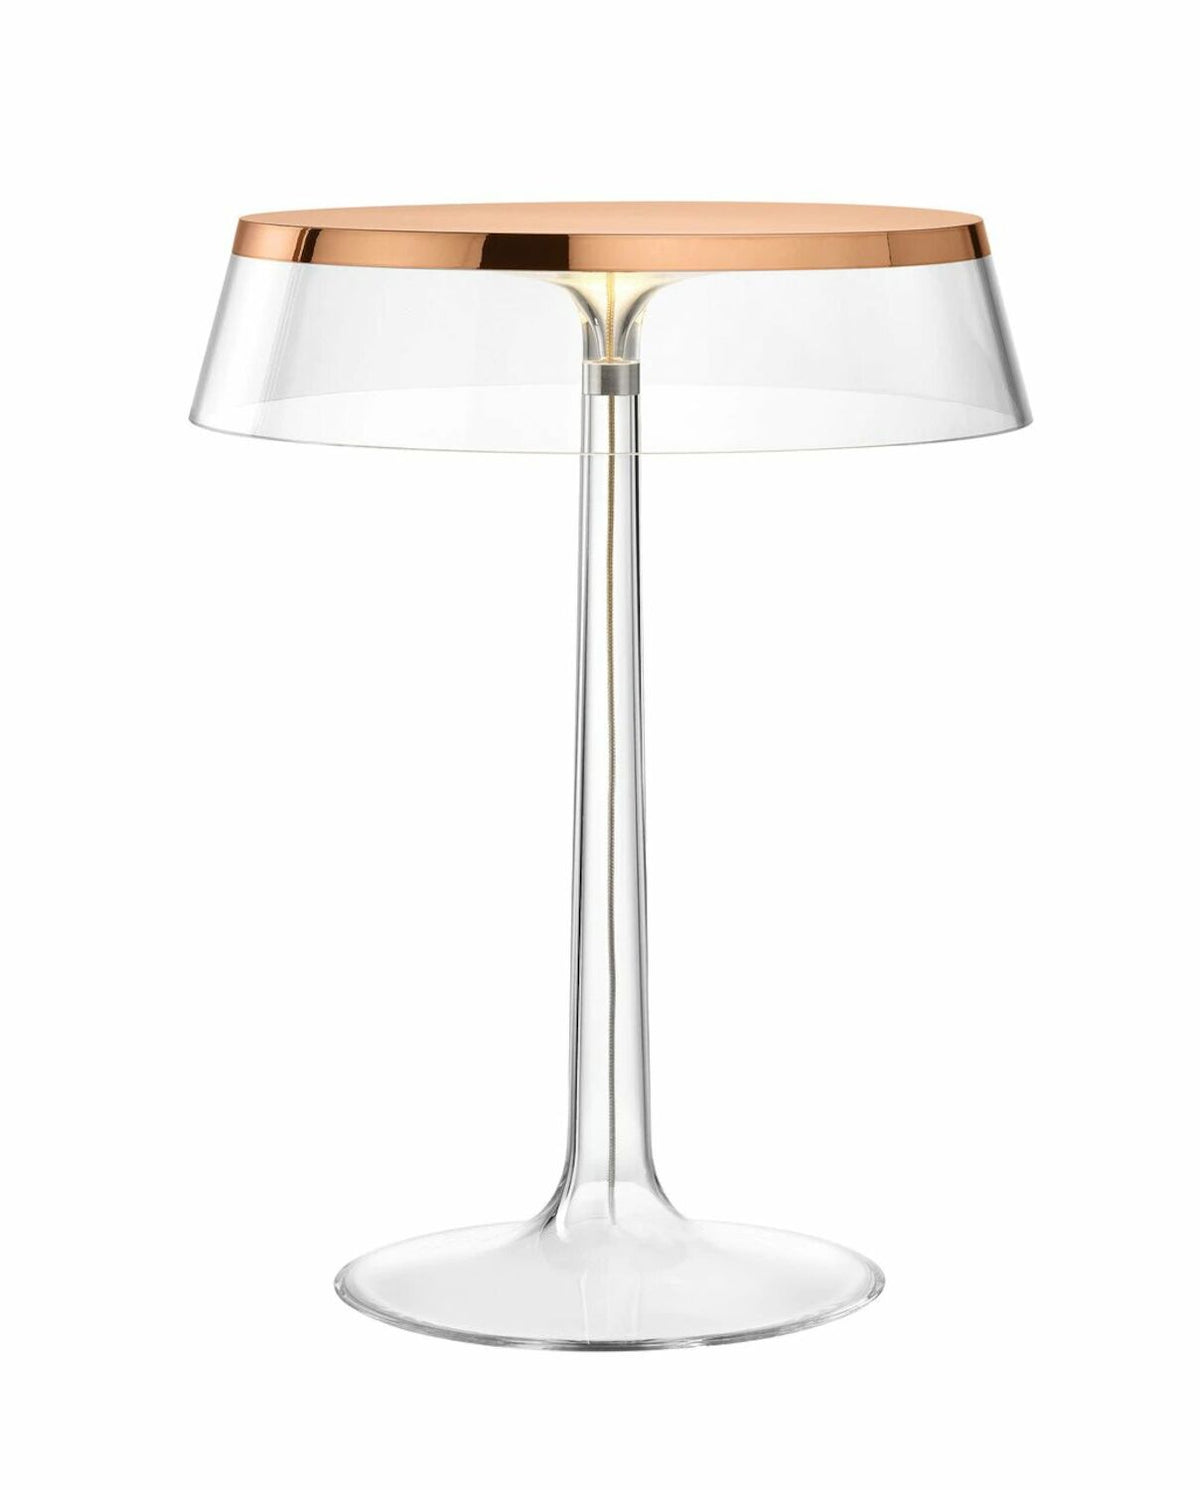 BON JOUR LED TABLE LAMP BY PHILIPPE STARCK